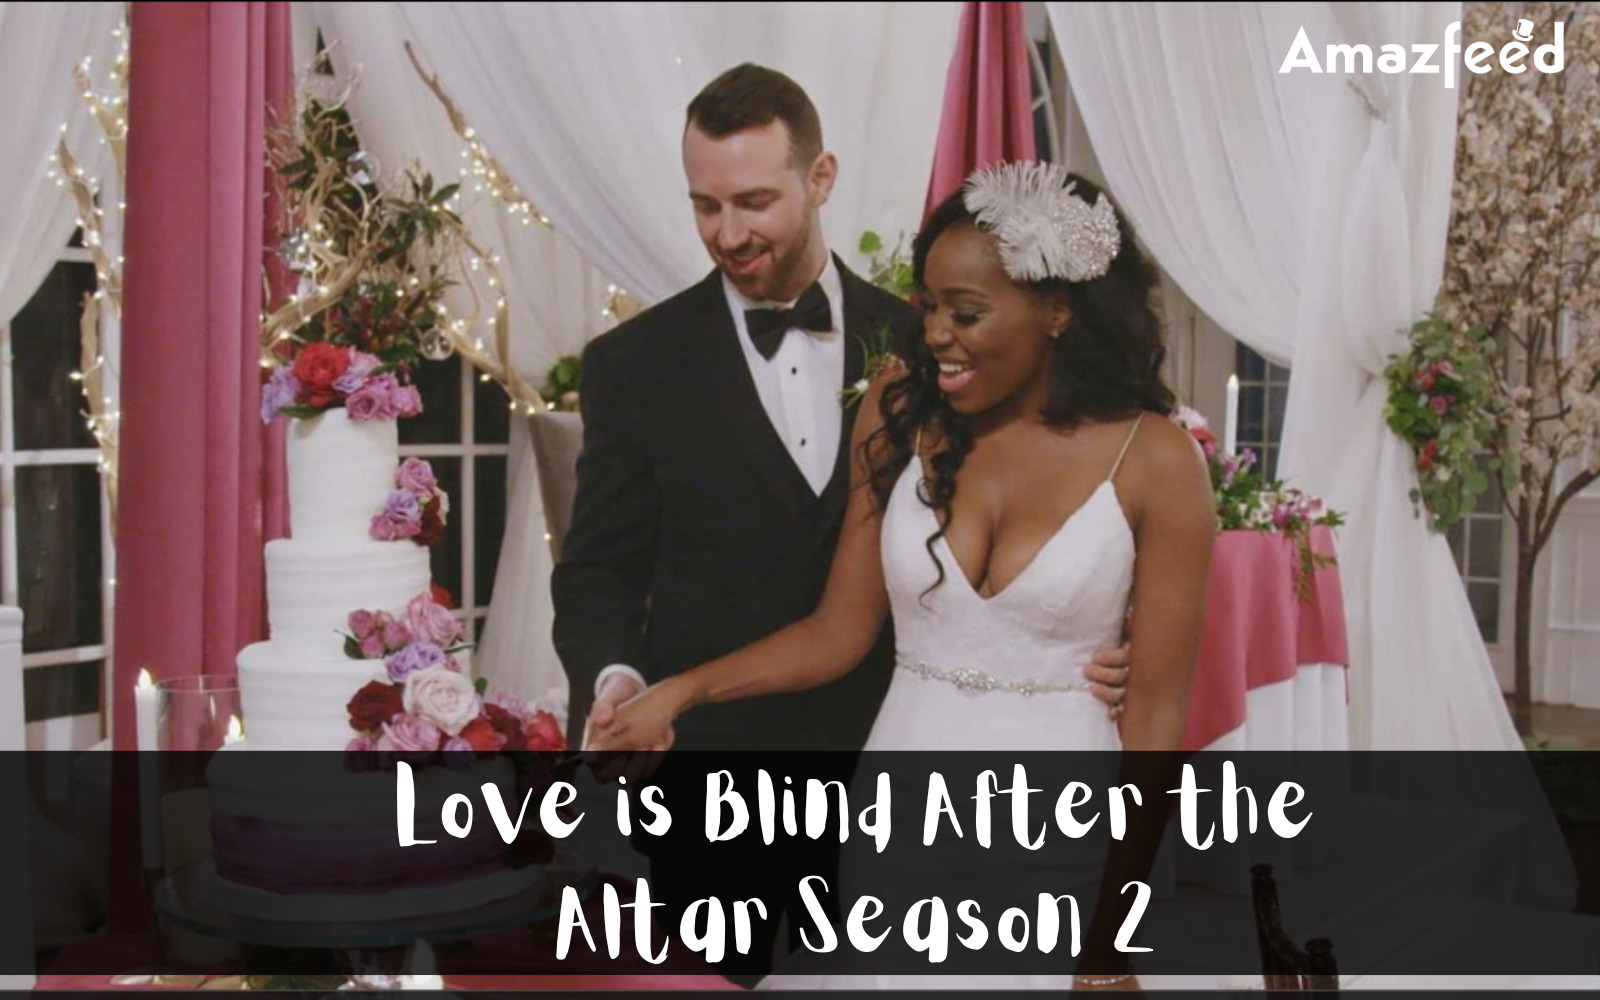 Who Will Be Part Of Love is Blind After the Altar Season 2 (cast and character)